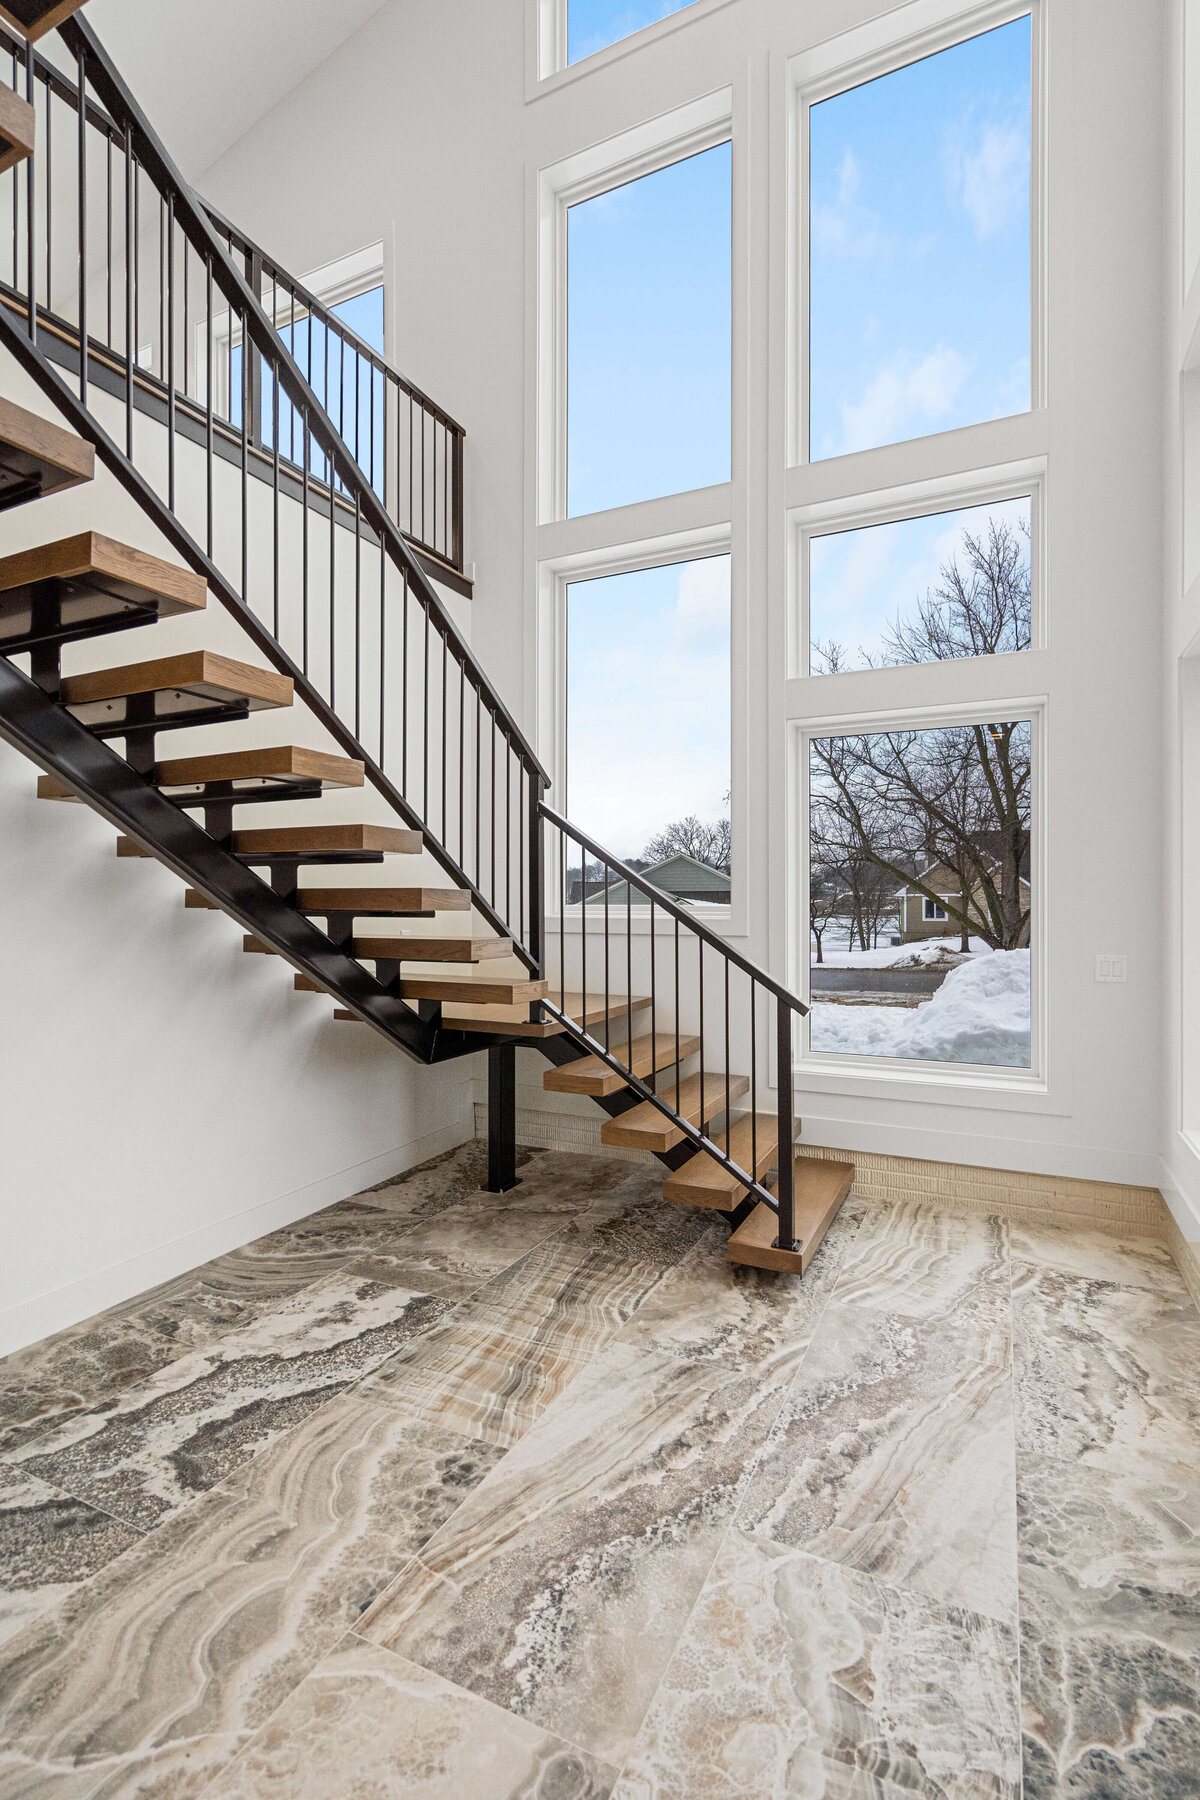 4204-Stairs-Entry-Room-Panorama-Central-Iowa-Custom-Home-JRL-Builders-07154